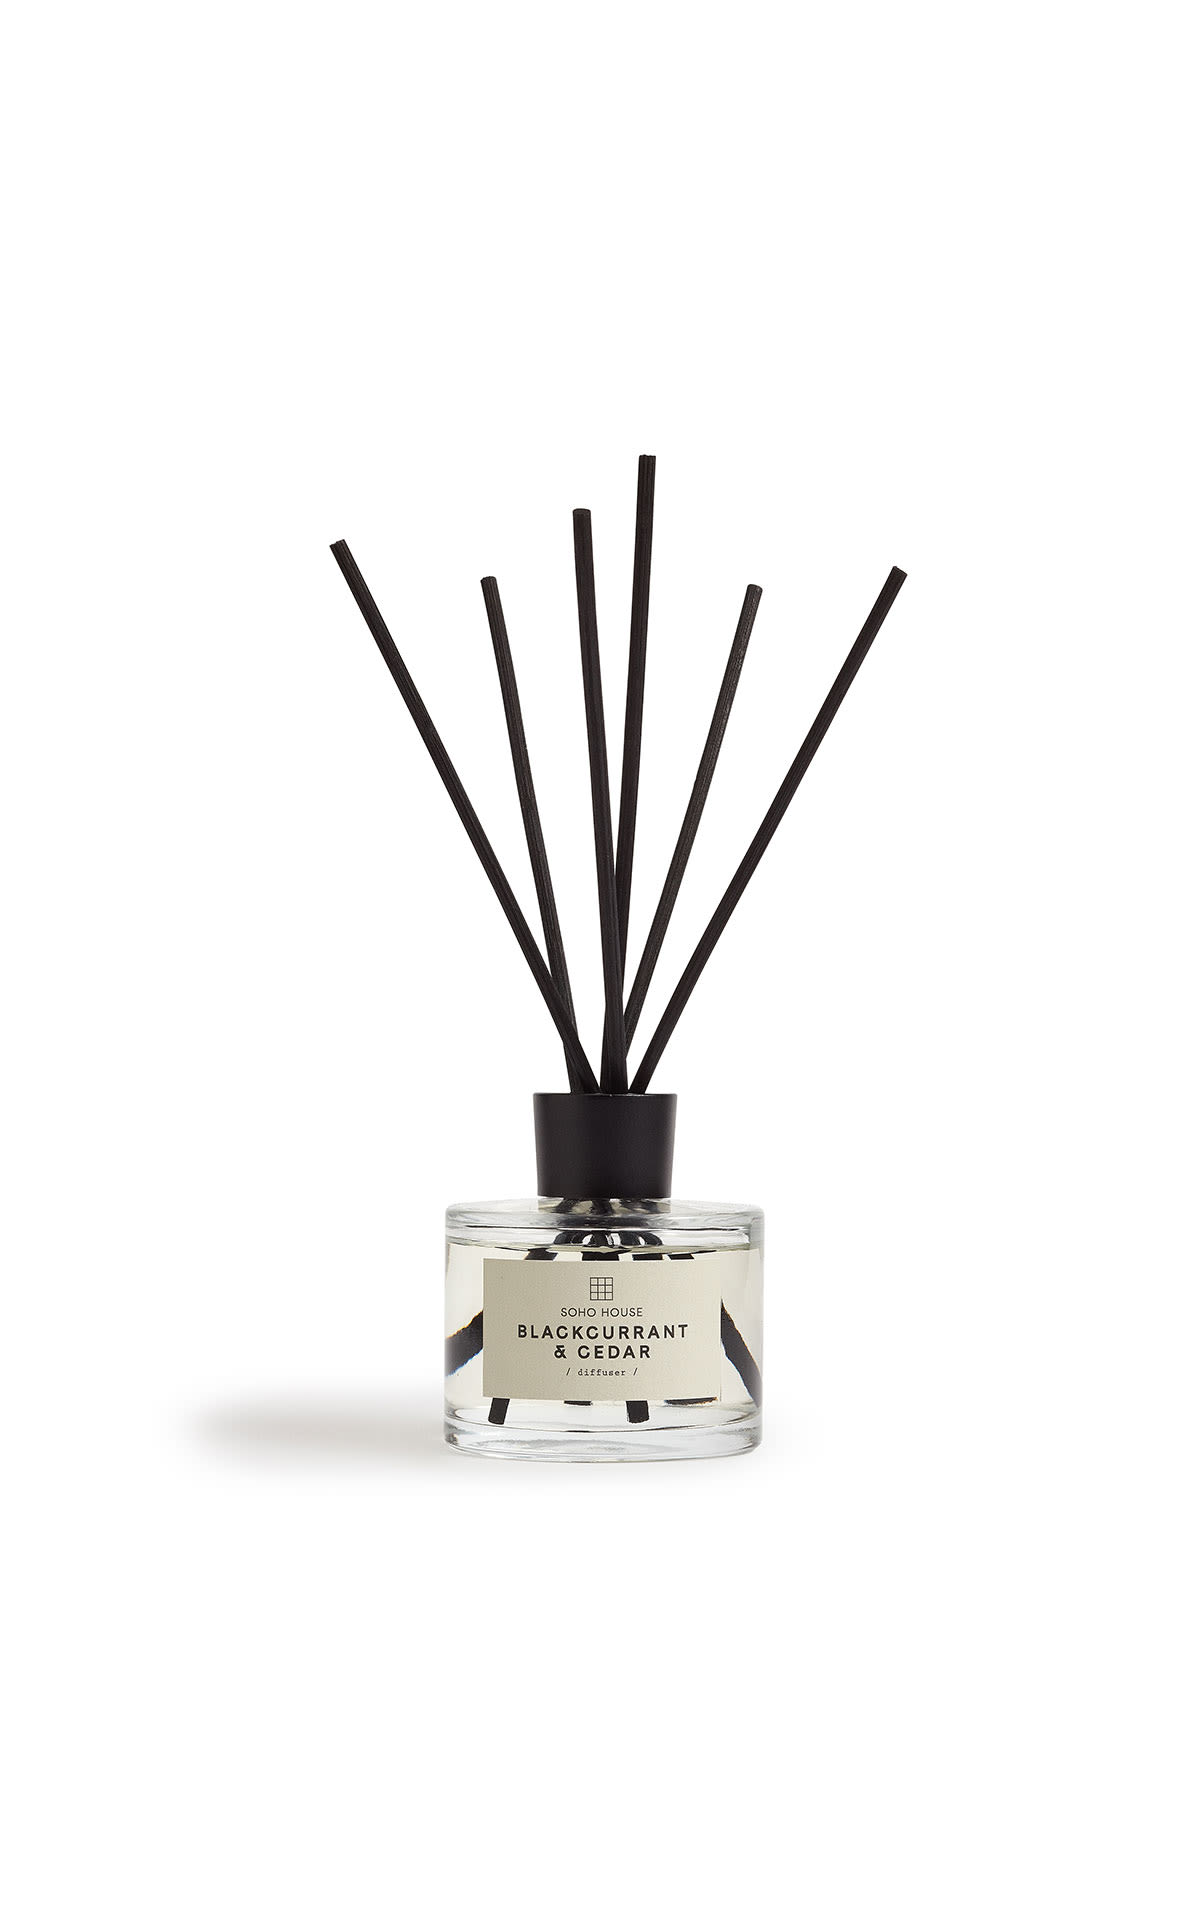 Soho Home Blackcurrant and cedar diffuser from Bicester Village